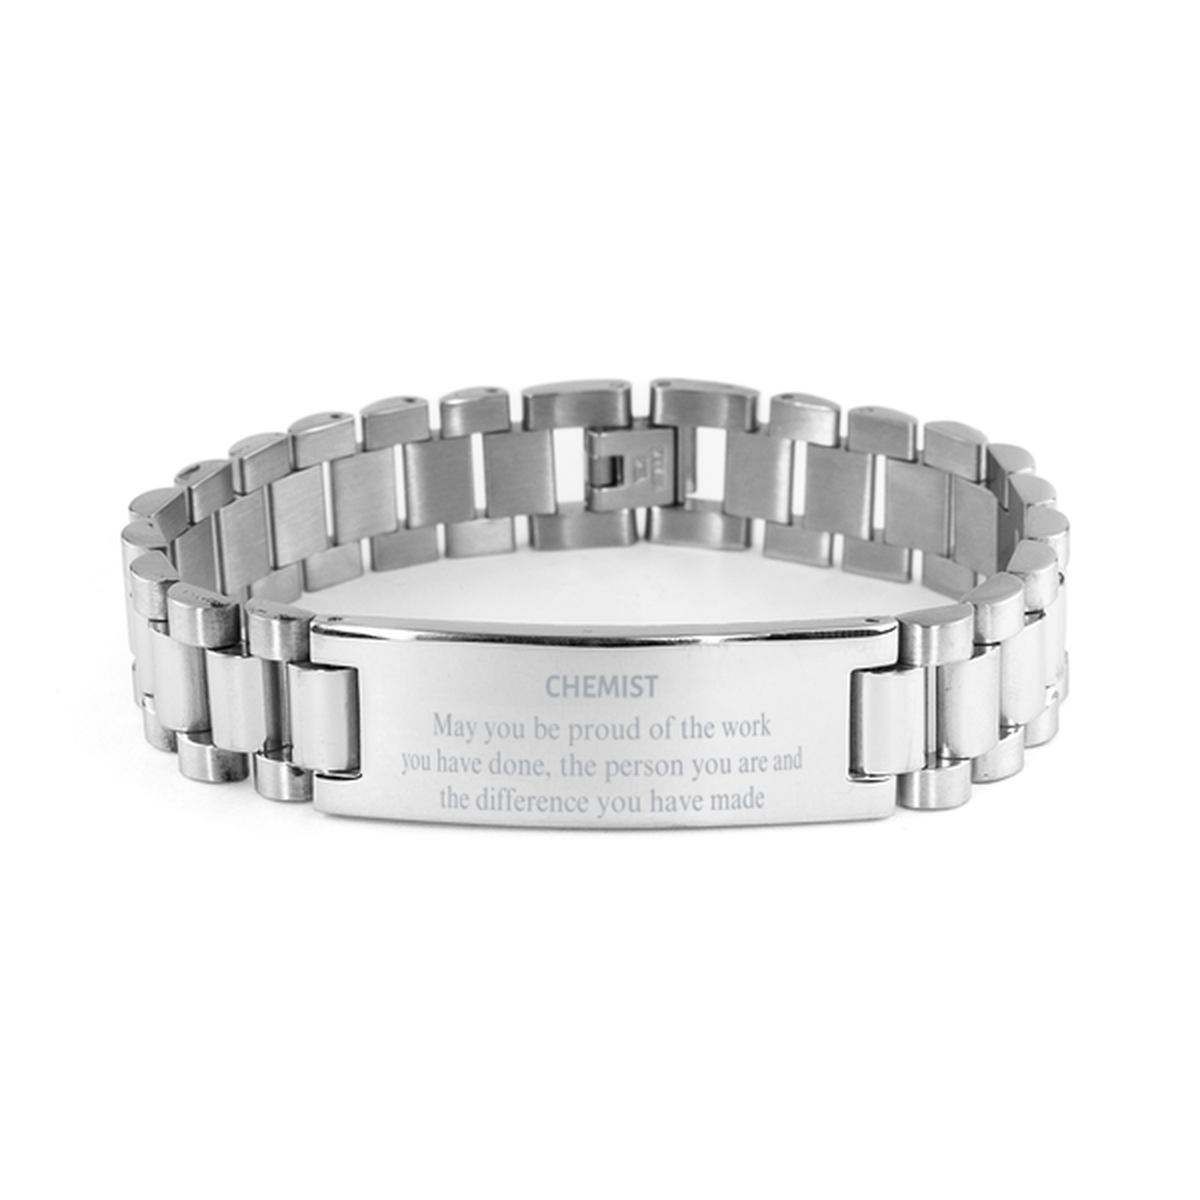 Chemist May you be proud of the work you have done, Retirement Chemist Ladder Stainless Steel Bracelet for Colleague Appreciation Gifts Amazing for Chemist